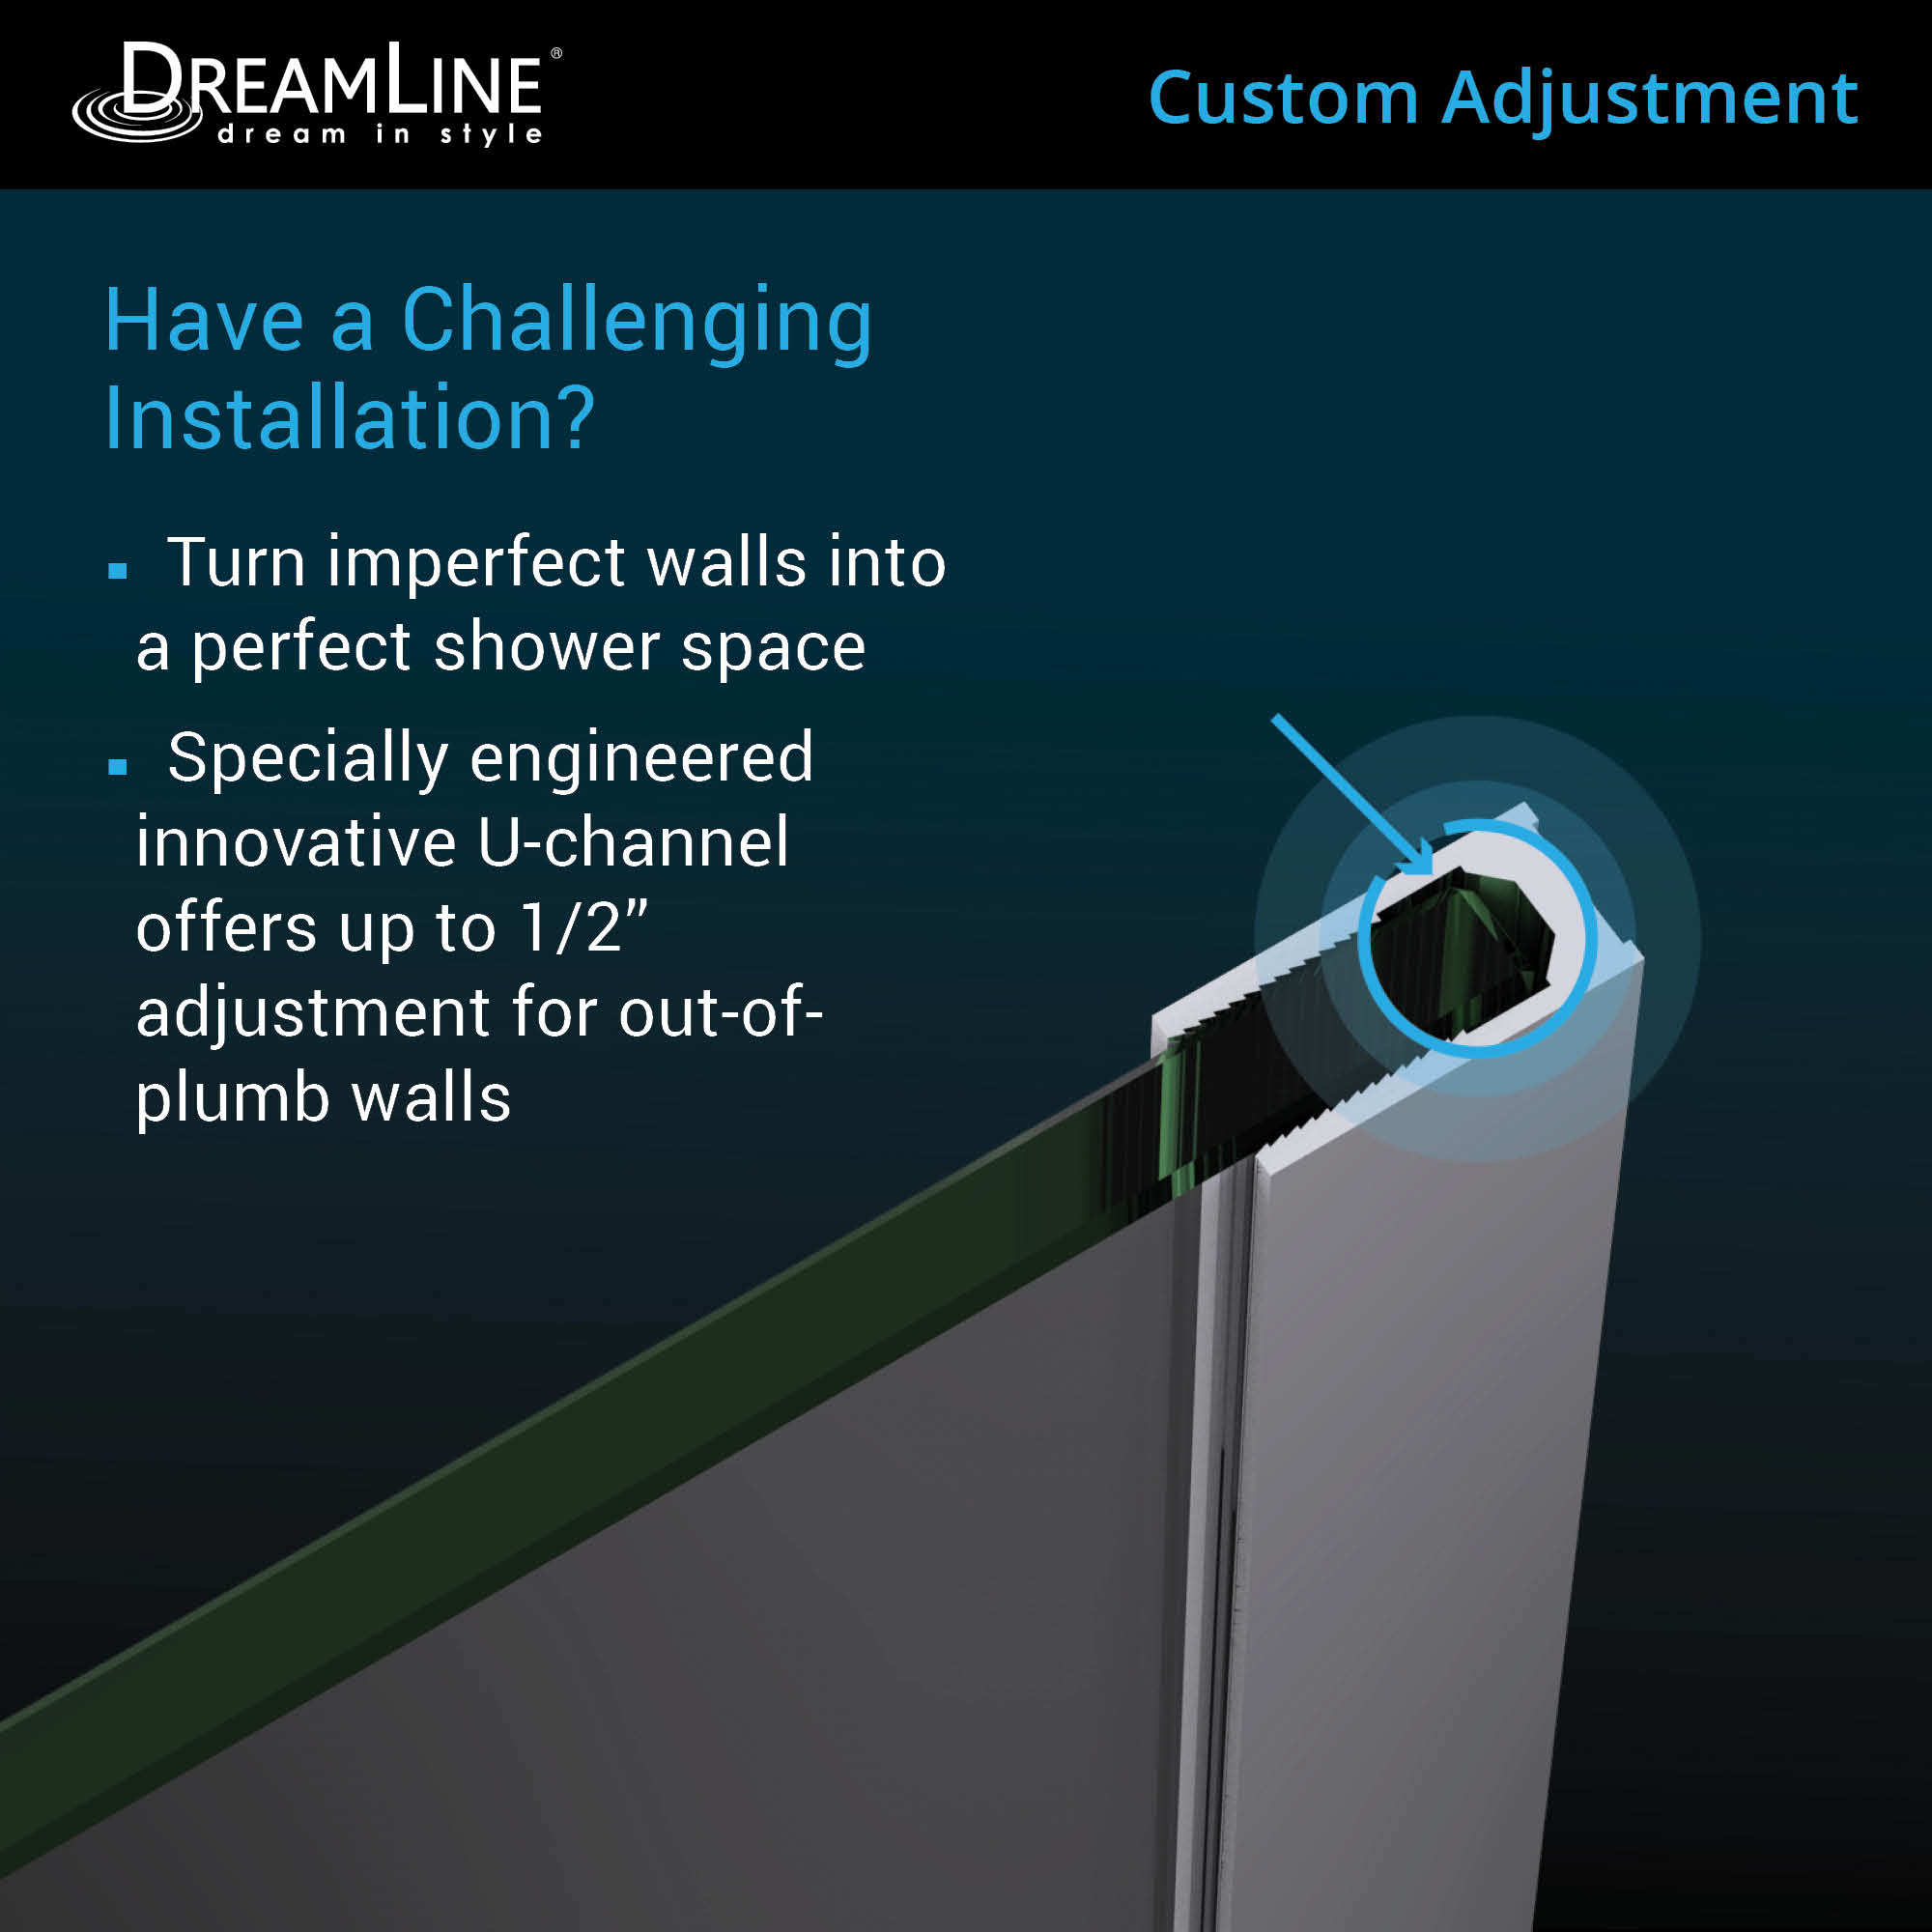 DreamLine Linea Two Adjacent Frameless Shower Screens 34 in. and 30 in. W x 72 in. H, Open Entry Design in Chrome